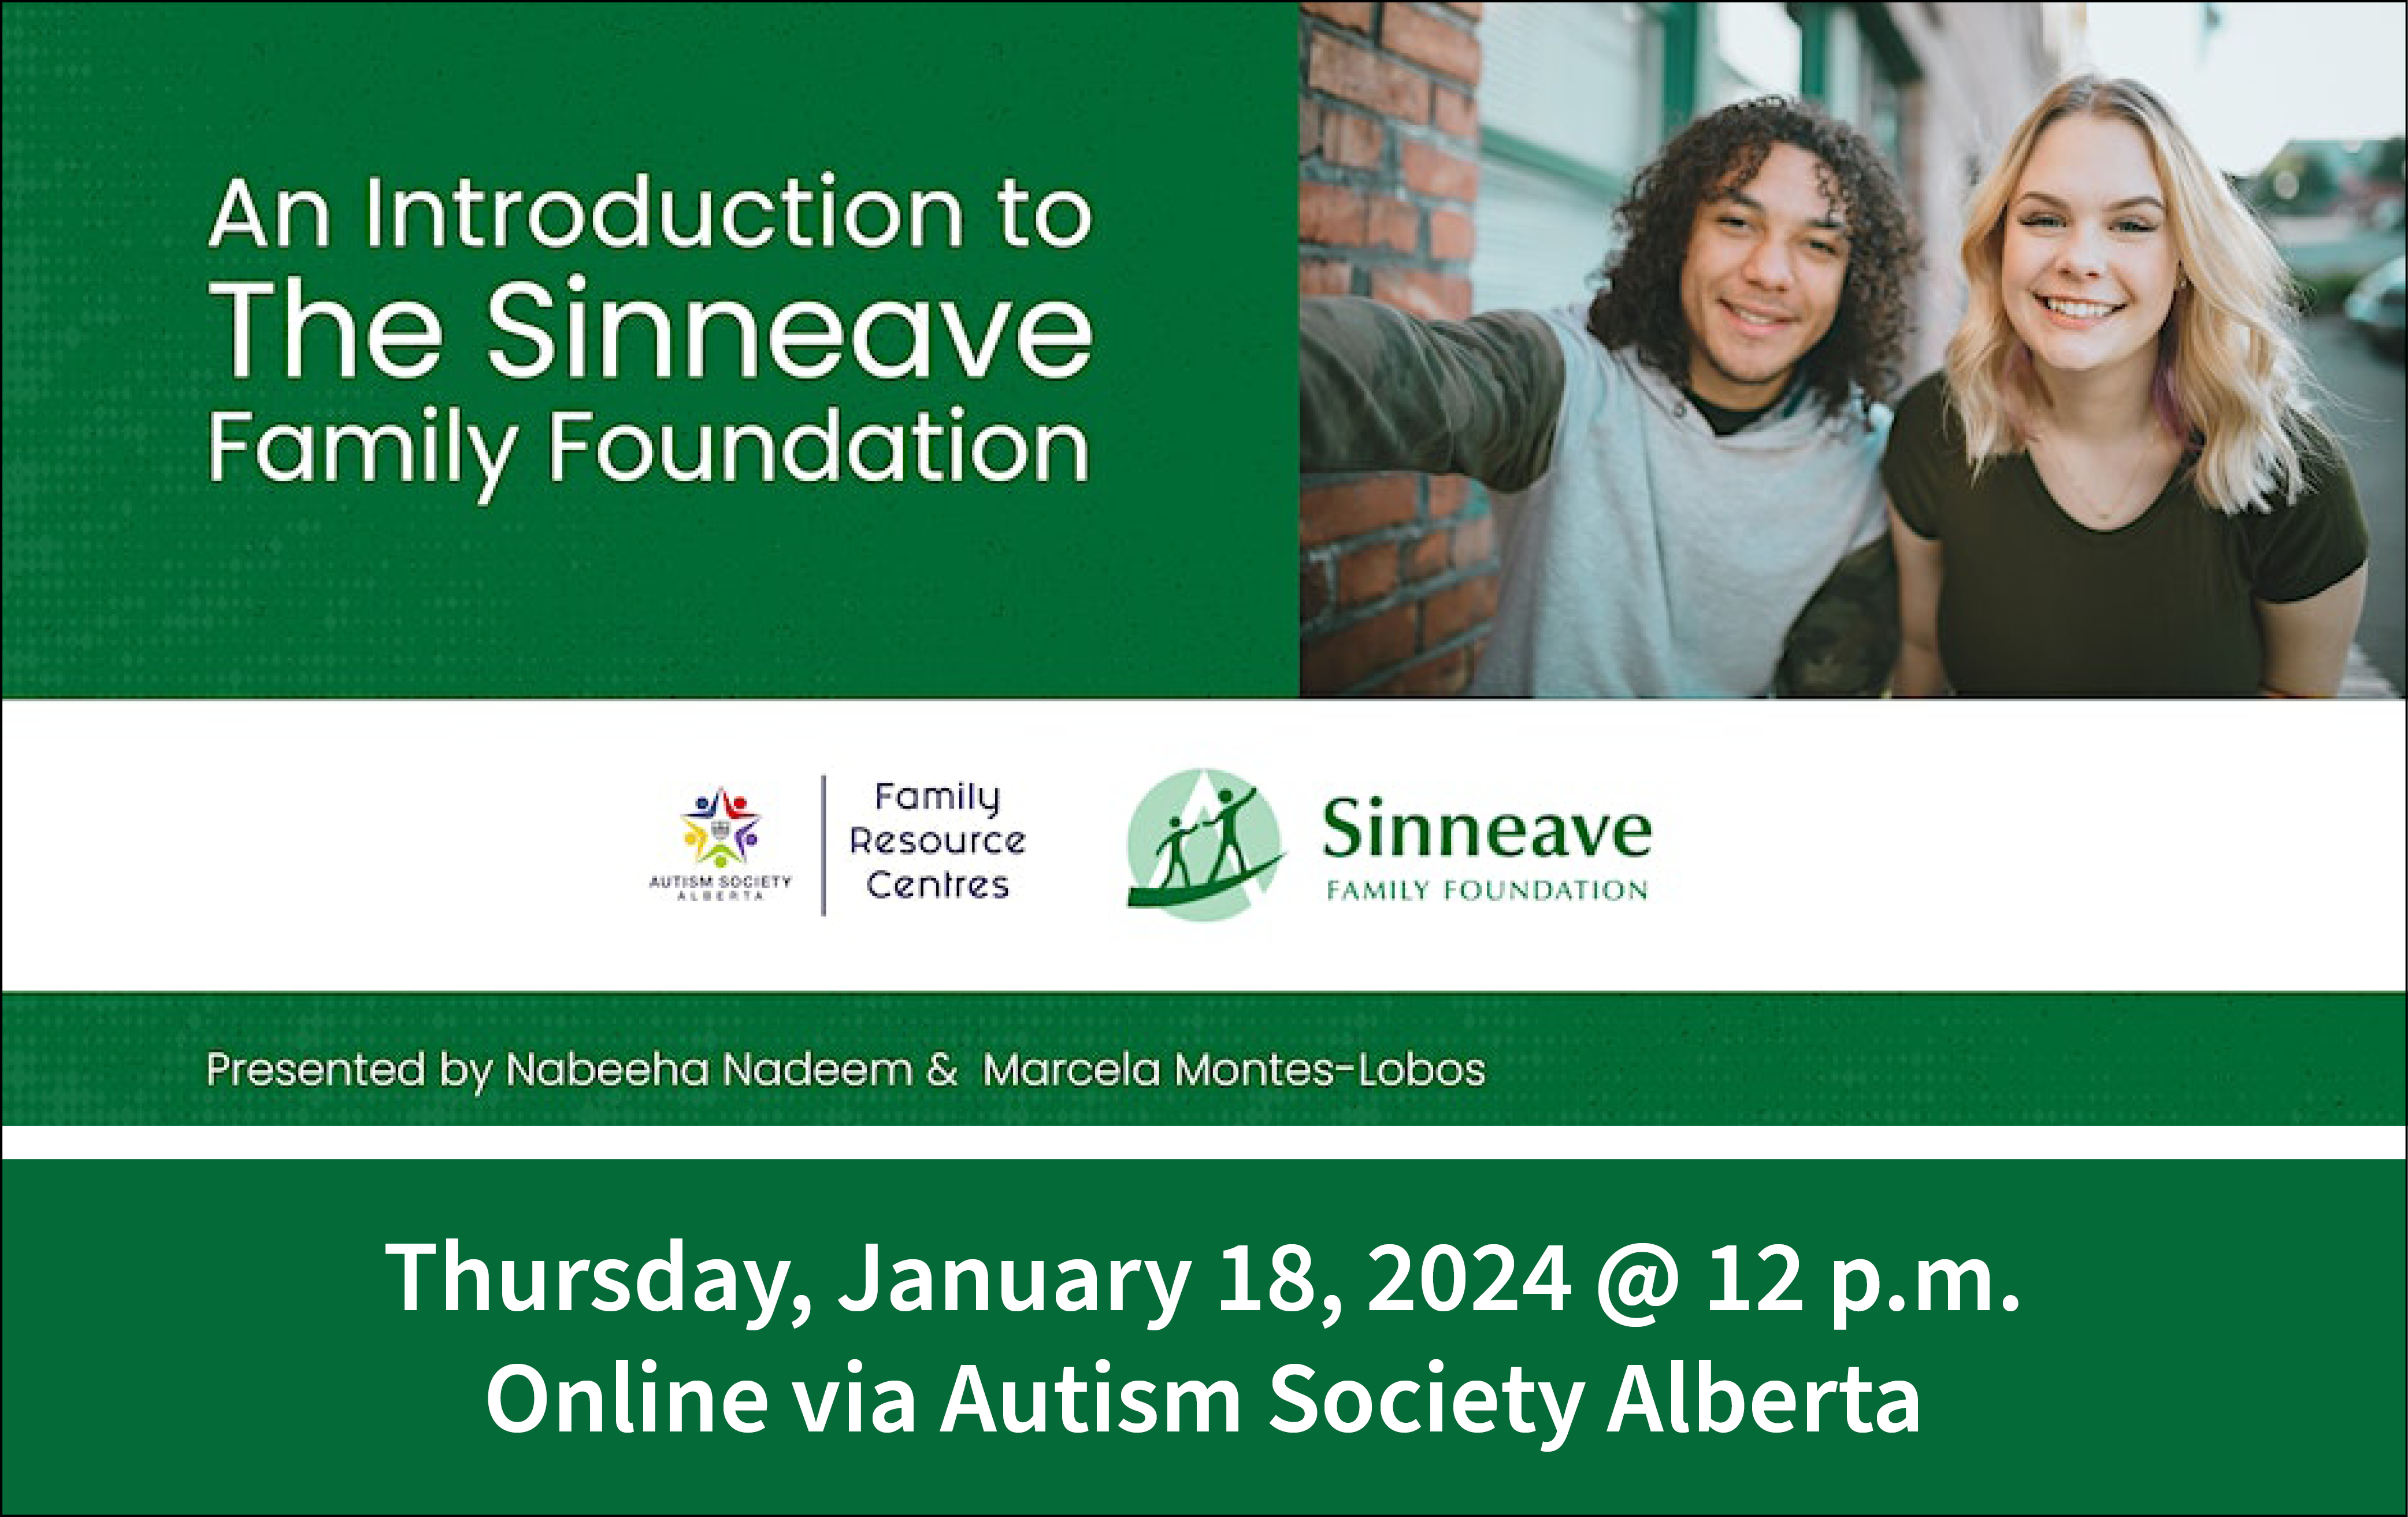 The image features a dark green background with white text, reading: An introduction to the Sinneave Family Foundation. Thurs. Jan. 18 @ 12 p.m. Online via Autism Society Alberta. In the upper right corner is a photo of two young people smiling at the camera.